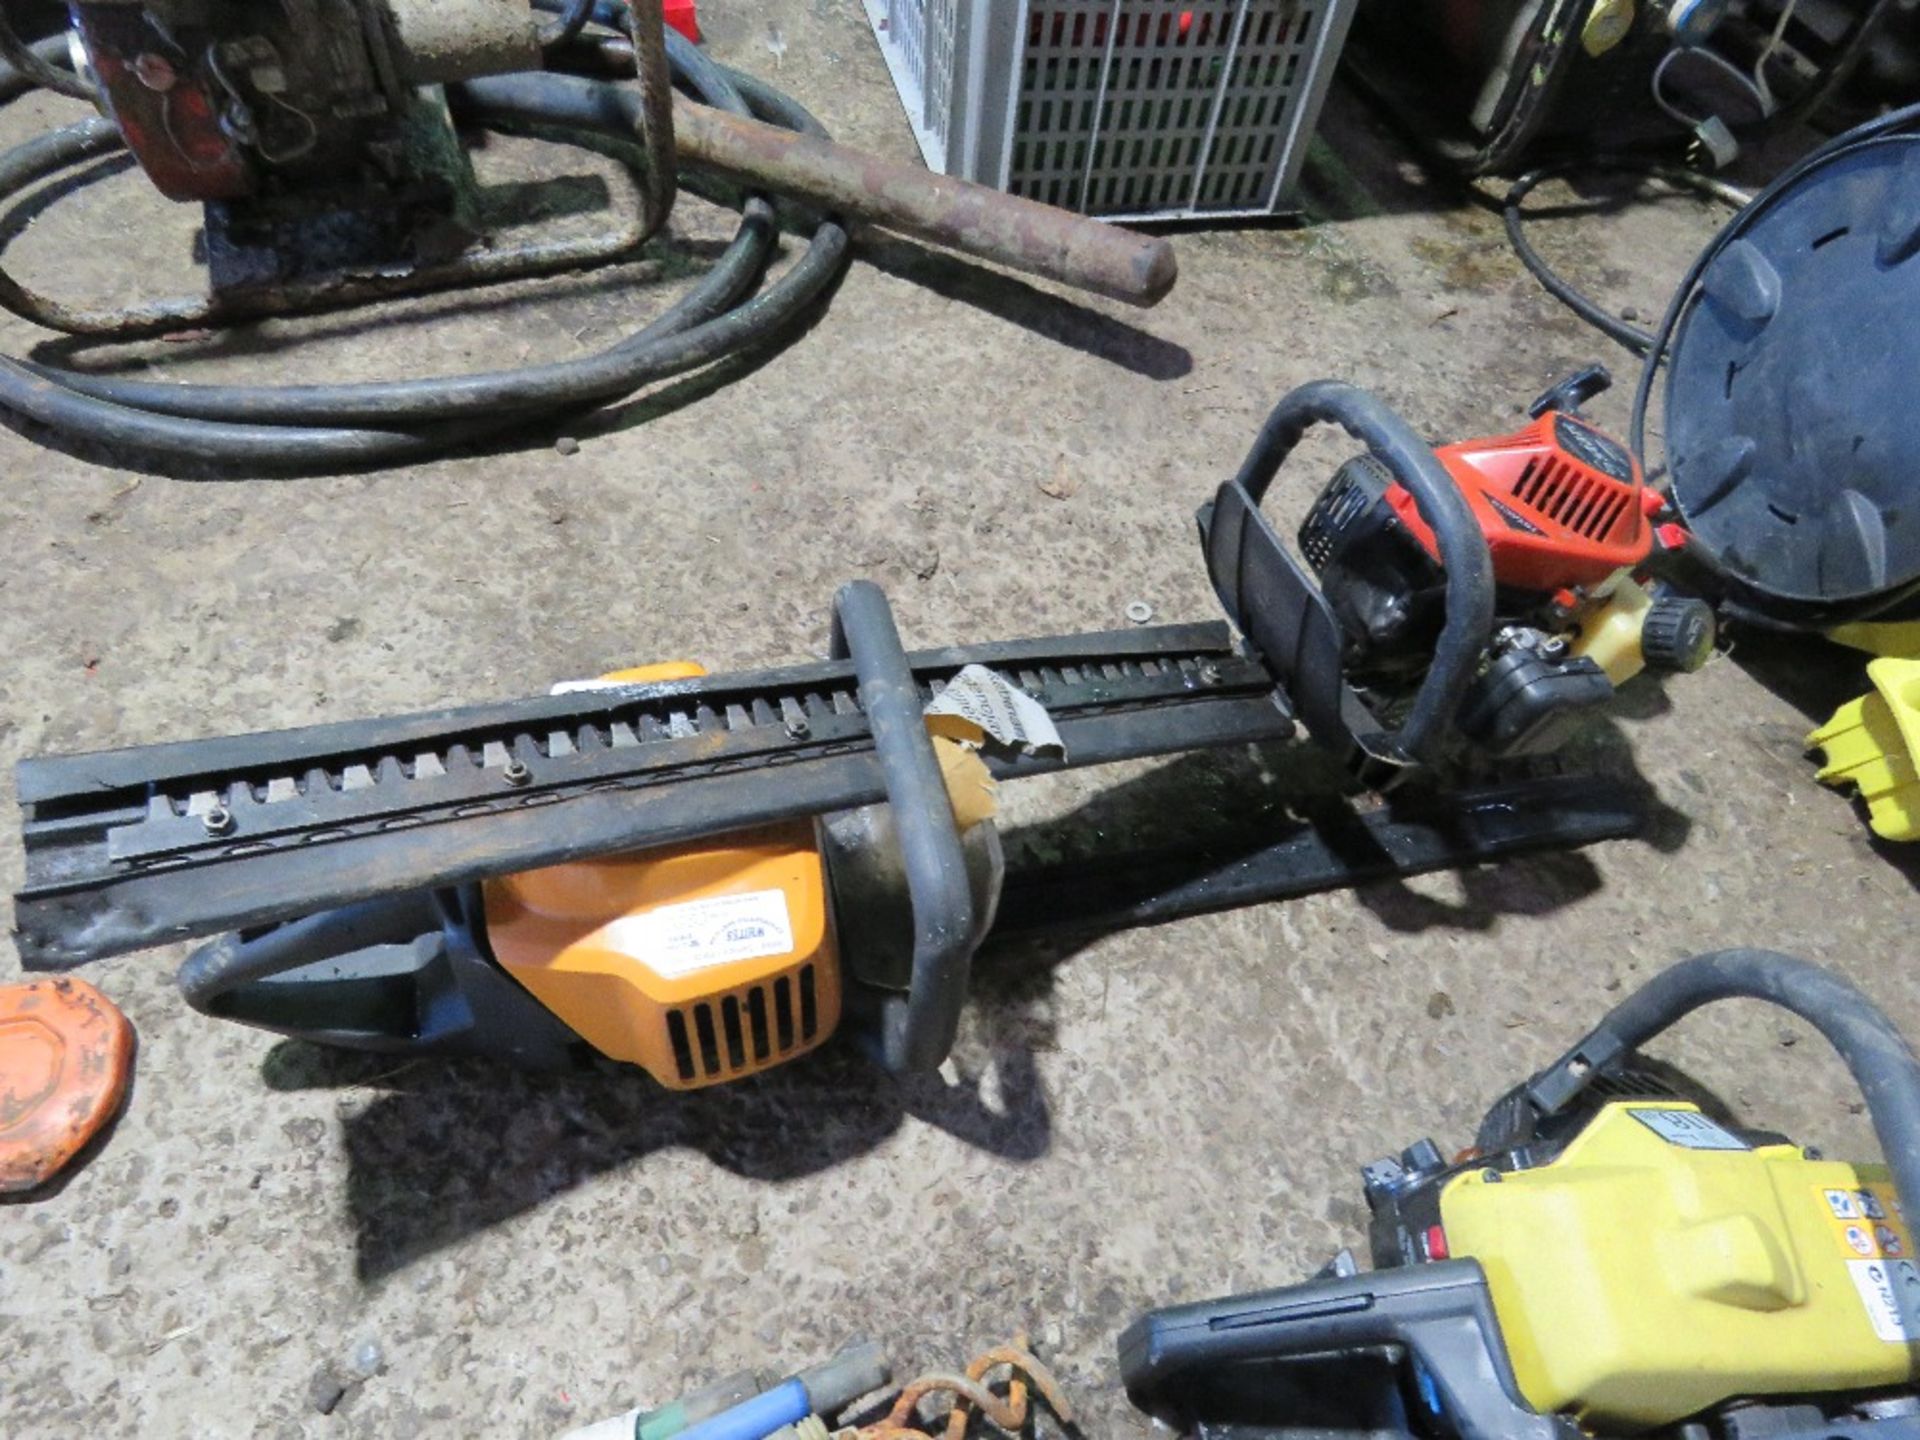 2 X PETROL ENGINED HEDGE CUTTERS. - Image 4 of 6